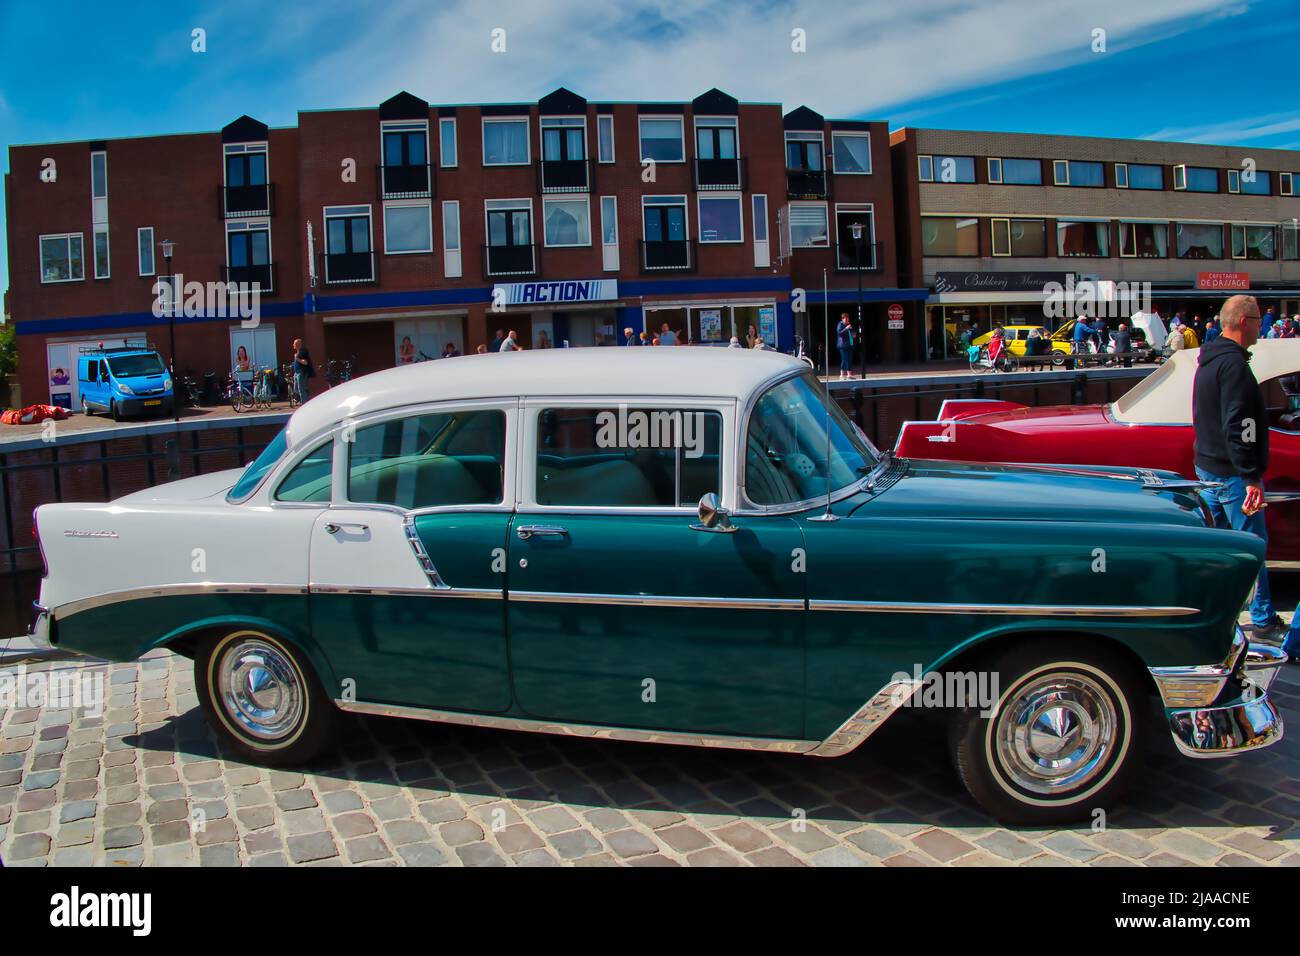 Vintage car Chevrolet Bel Air 1950’s at a classic car show in Uithuizen, Groningen, the Netherlands Stock Photo